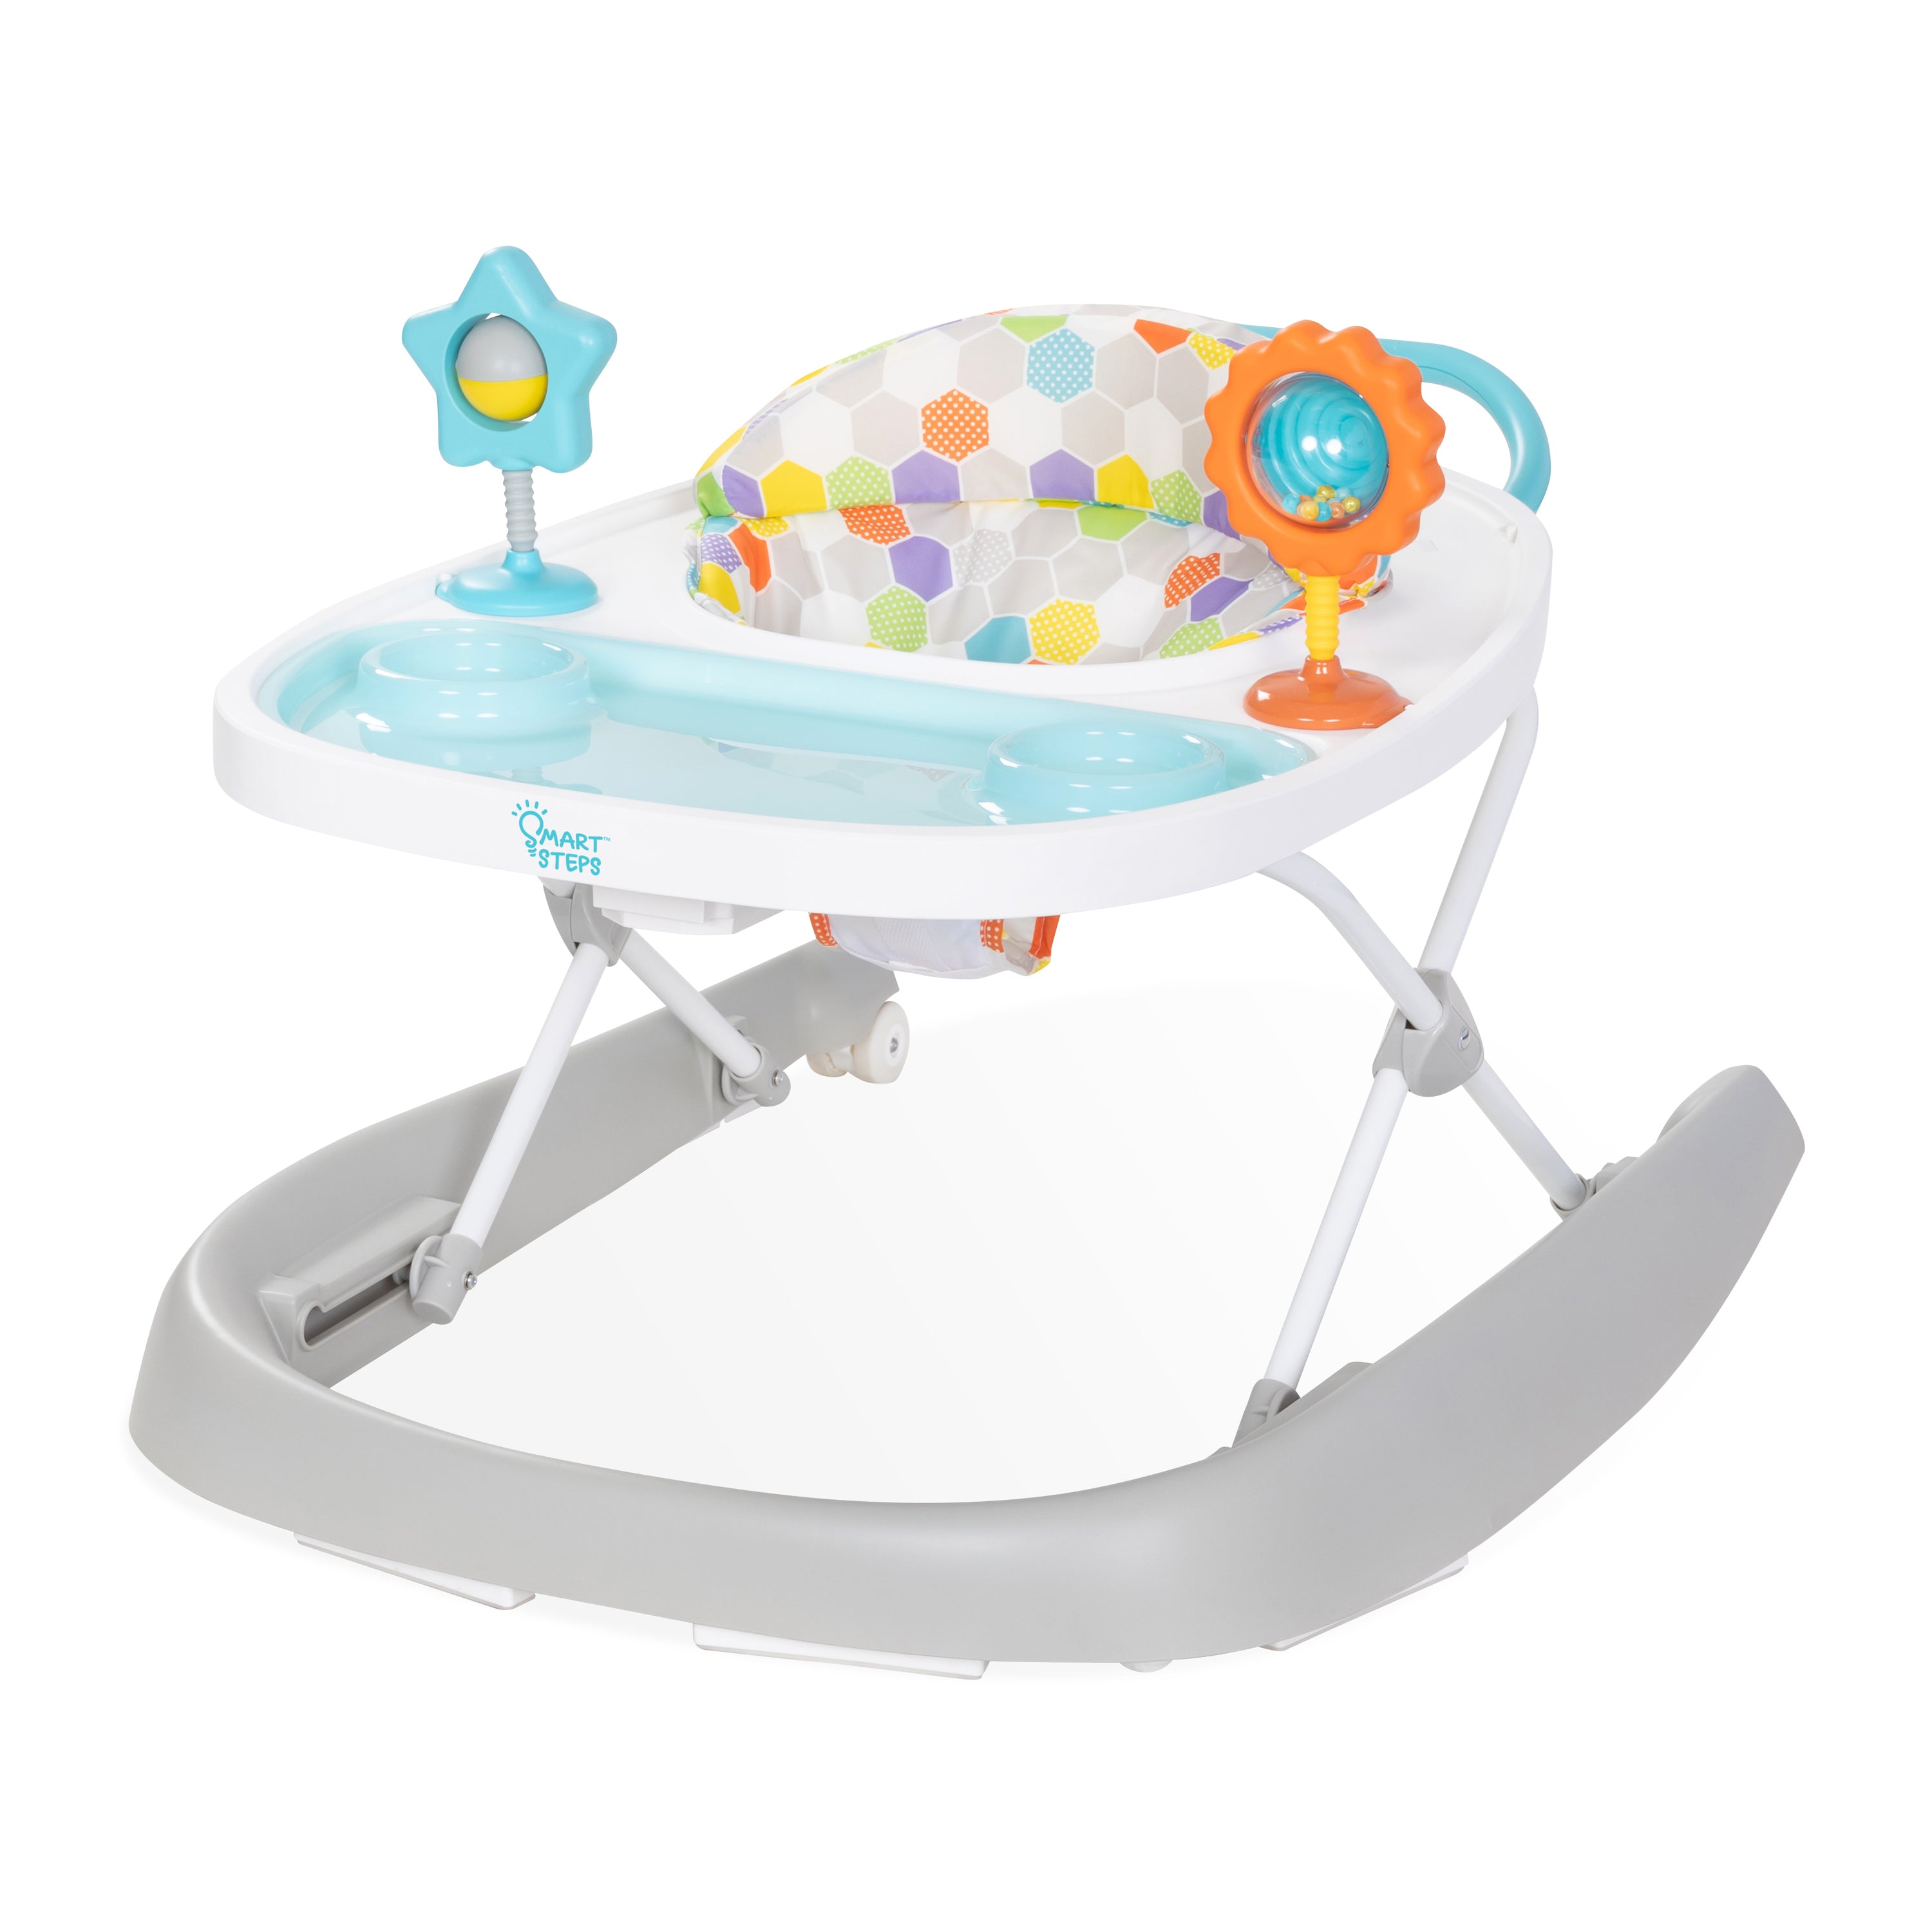 How to Adjust Baby Trend Walker: A Step-by-Step Guide